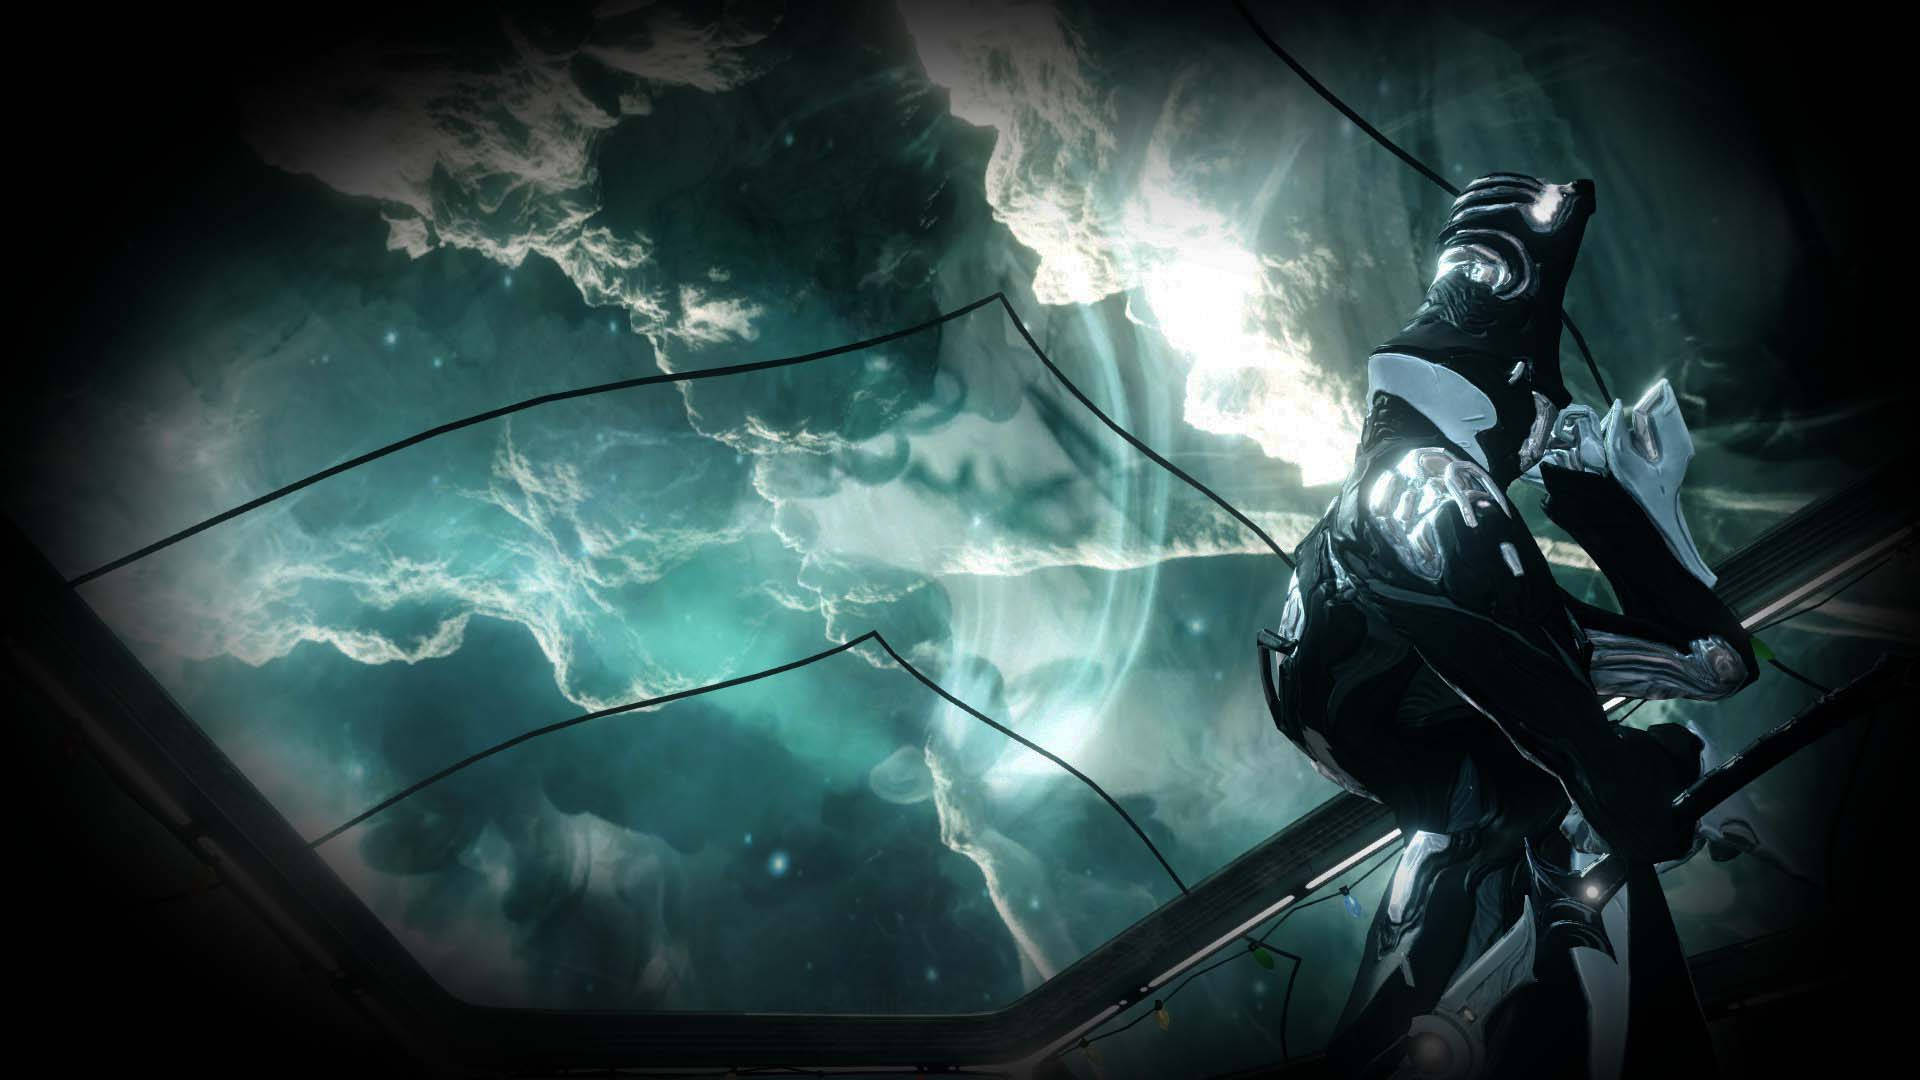 Explore the eternal nightmare of the Void with Warframe's Limbo Wallpaper